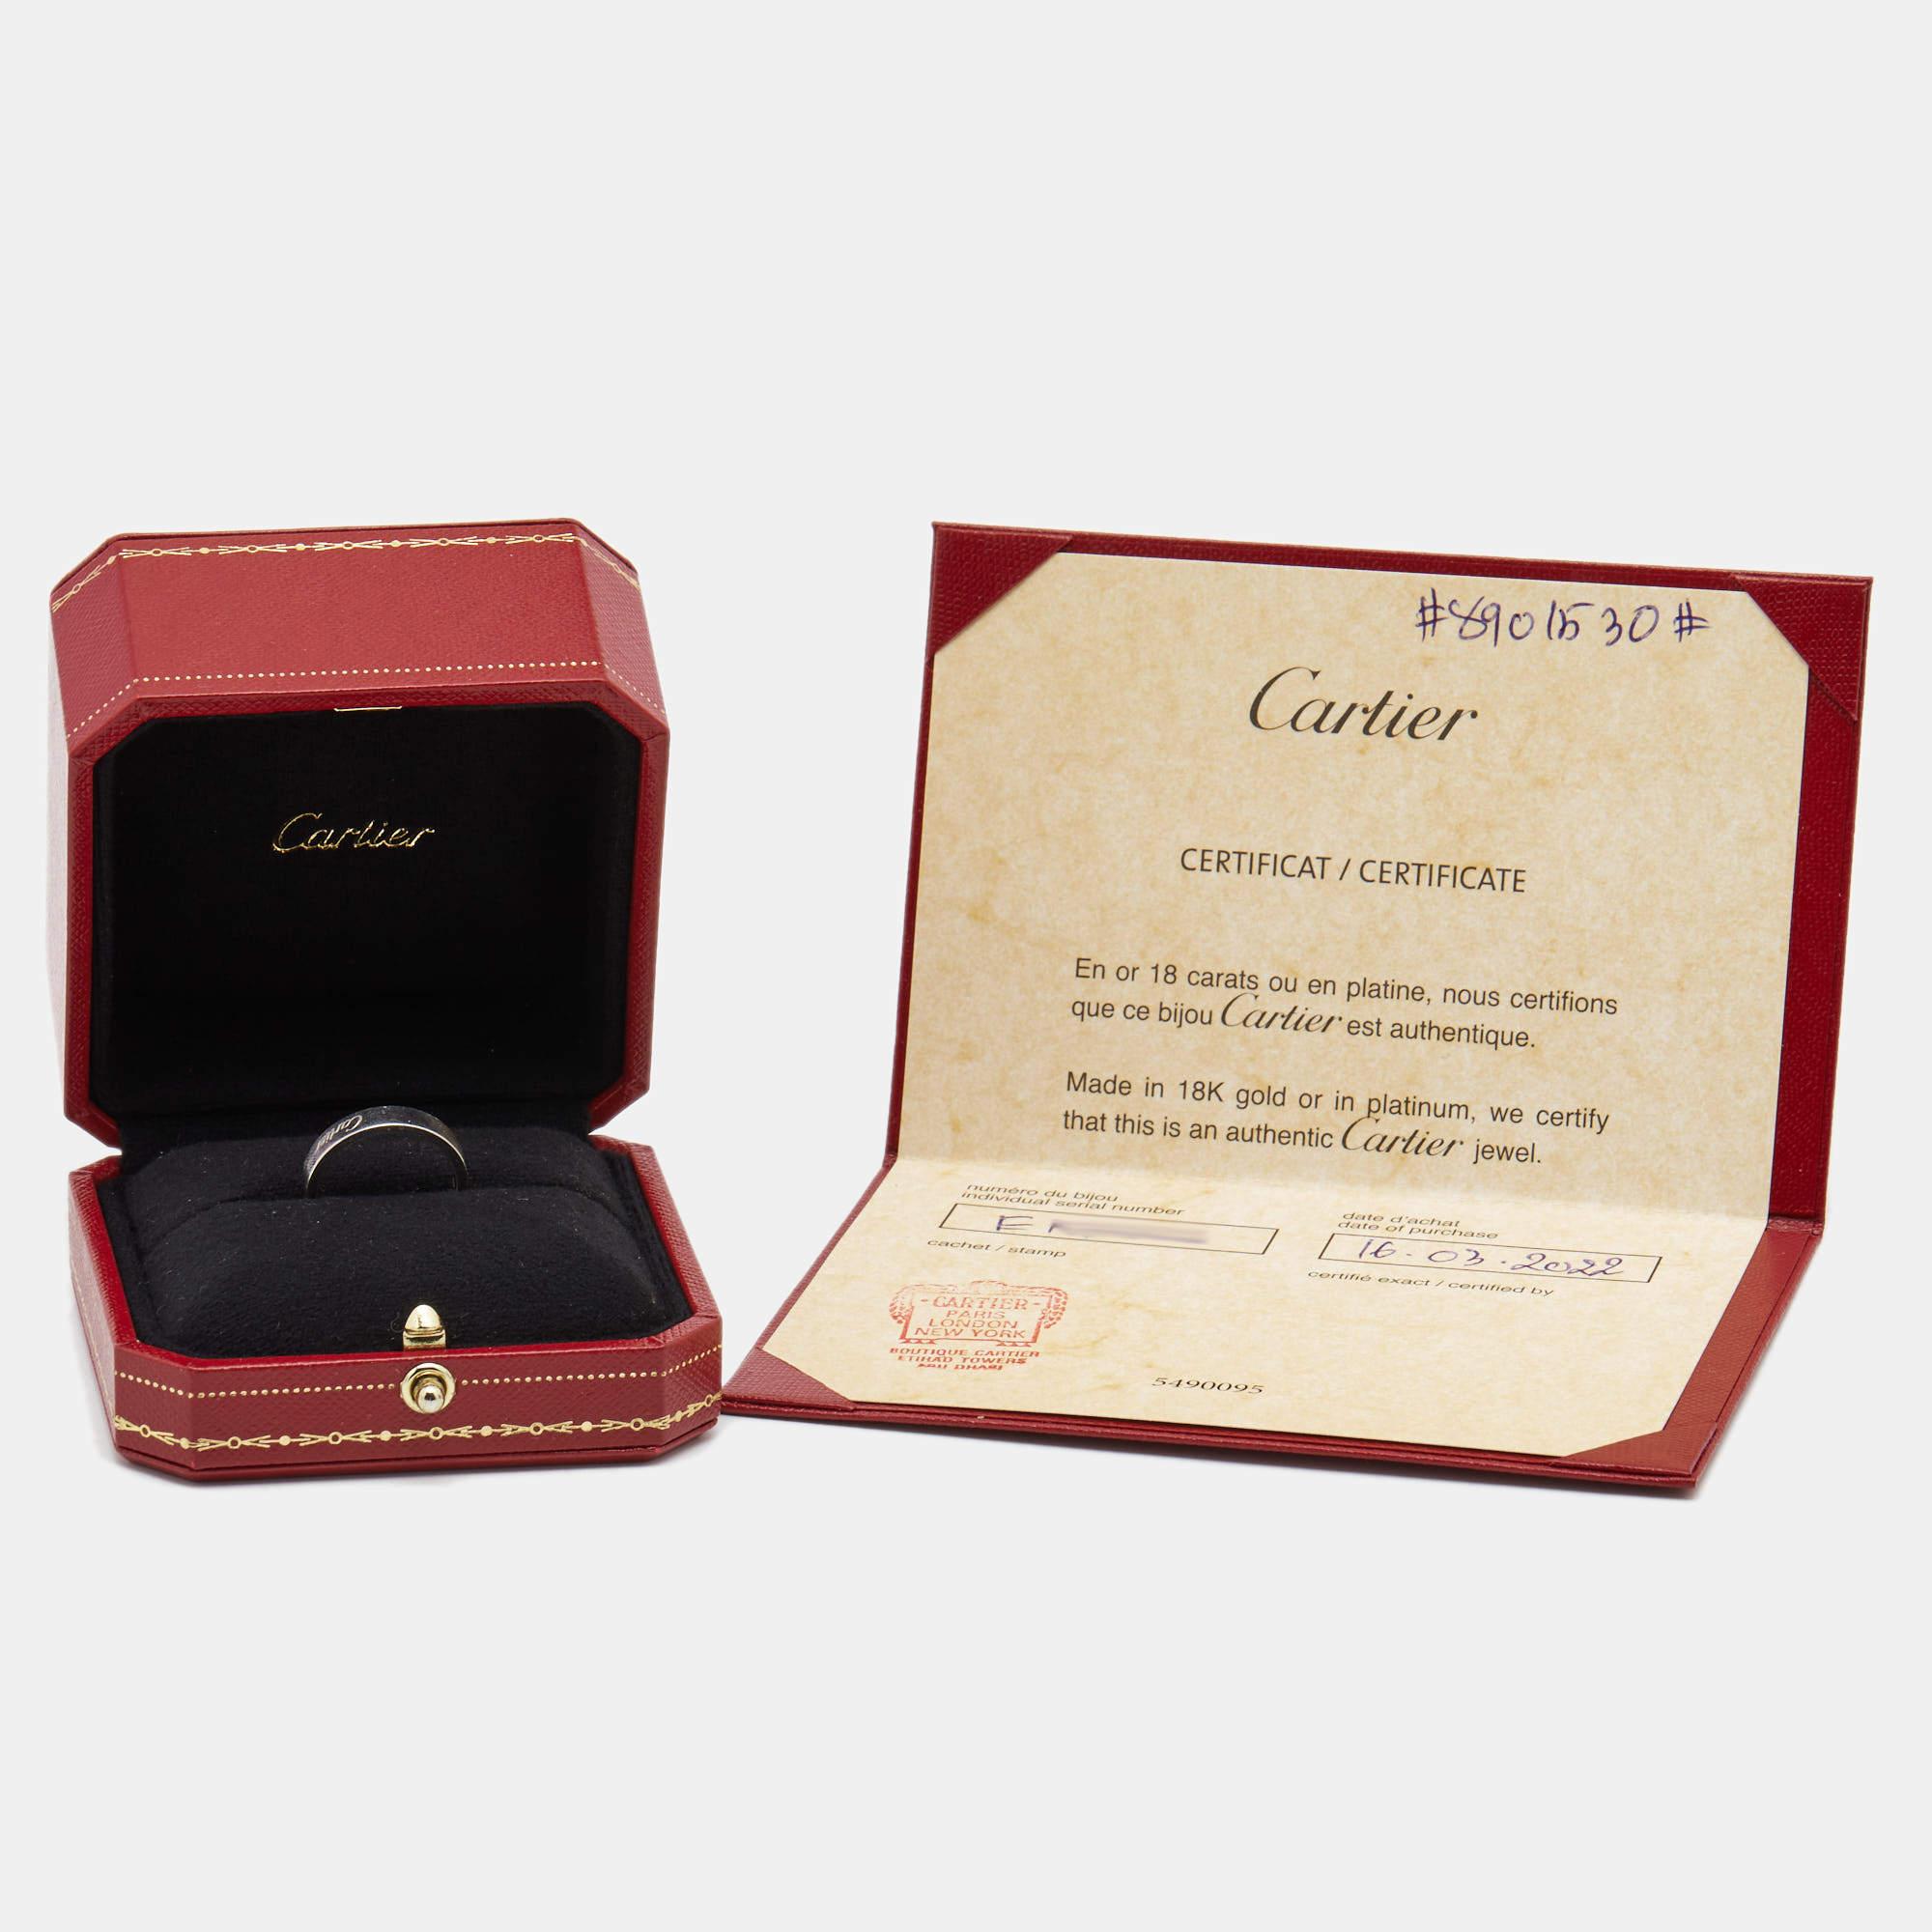 cartier ring size 54